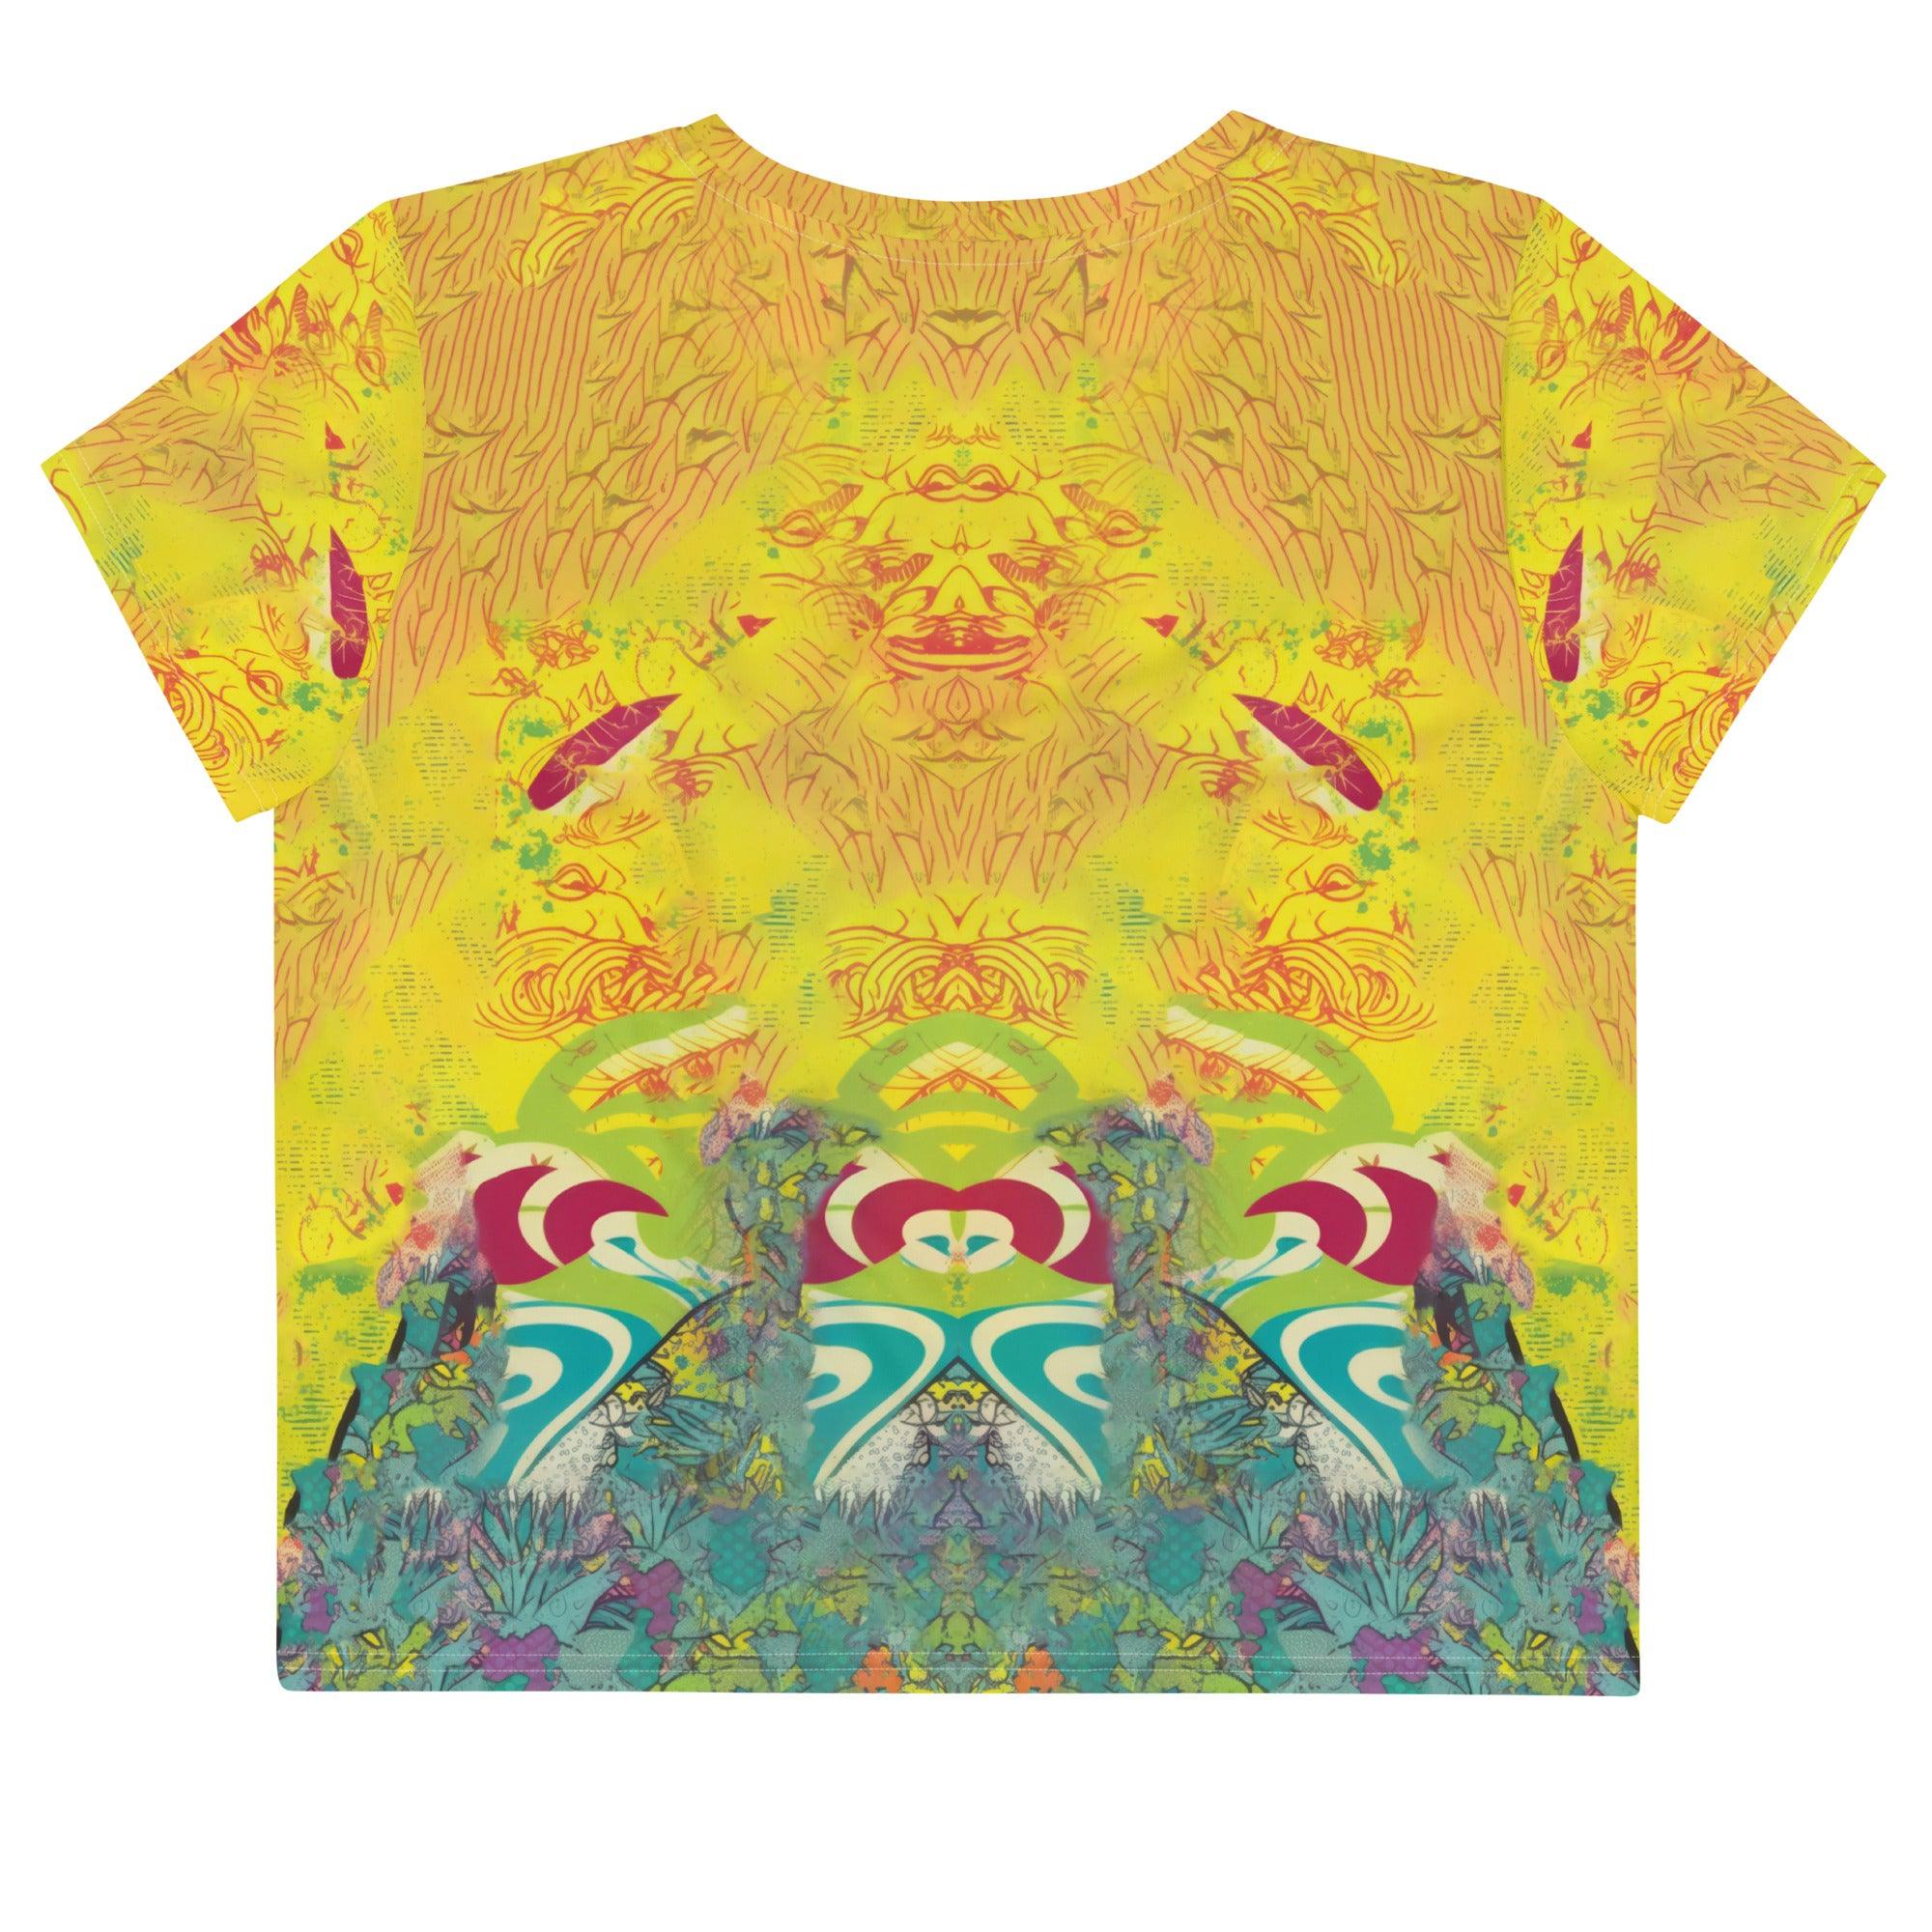 Surfing 1 49 All-Over Print Crop Tee - Beyond T-shirts